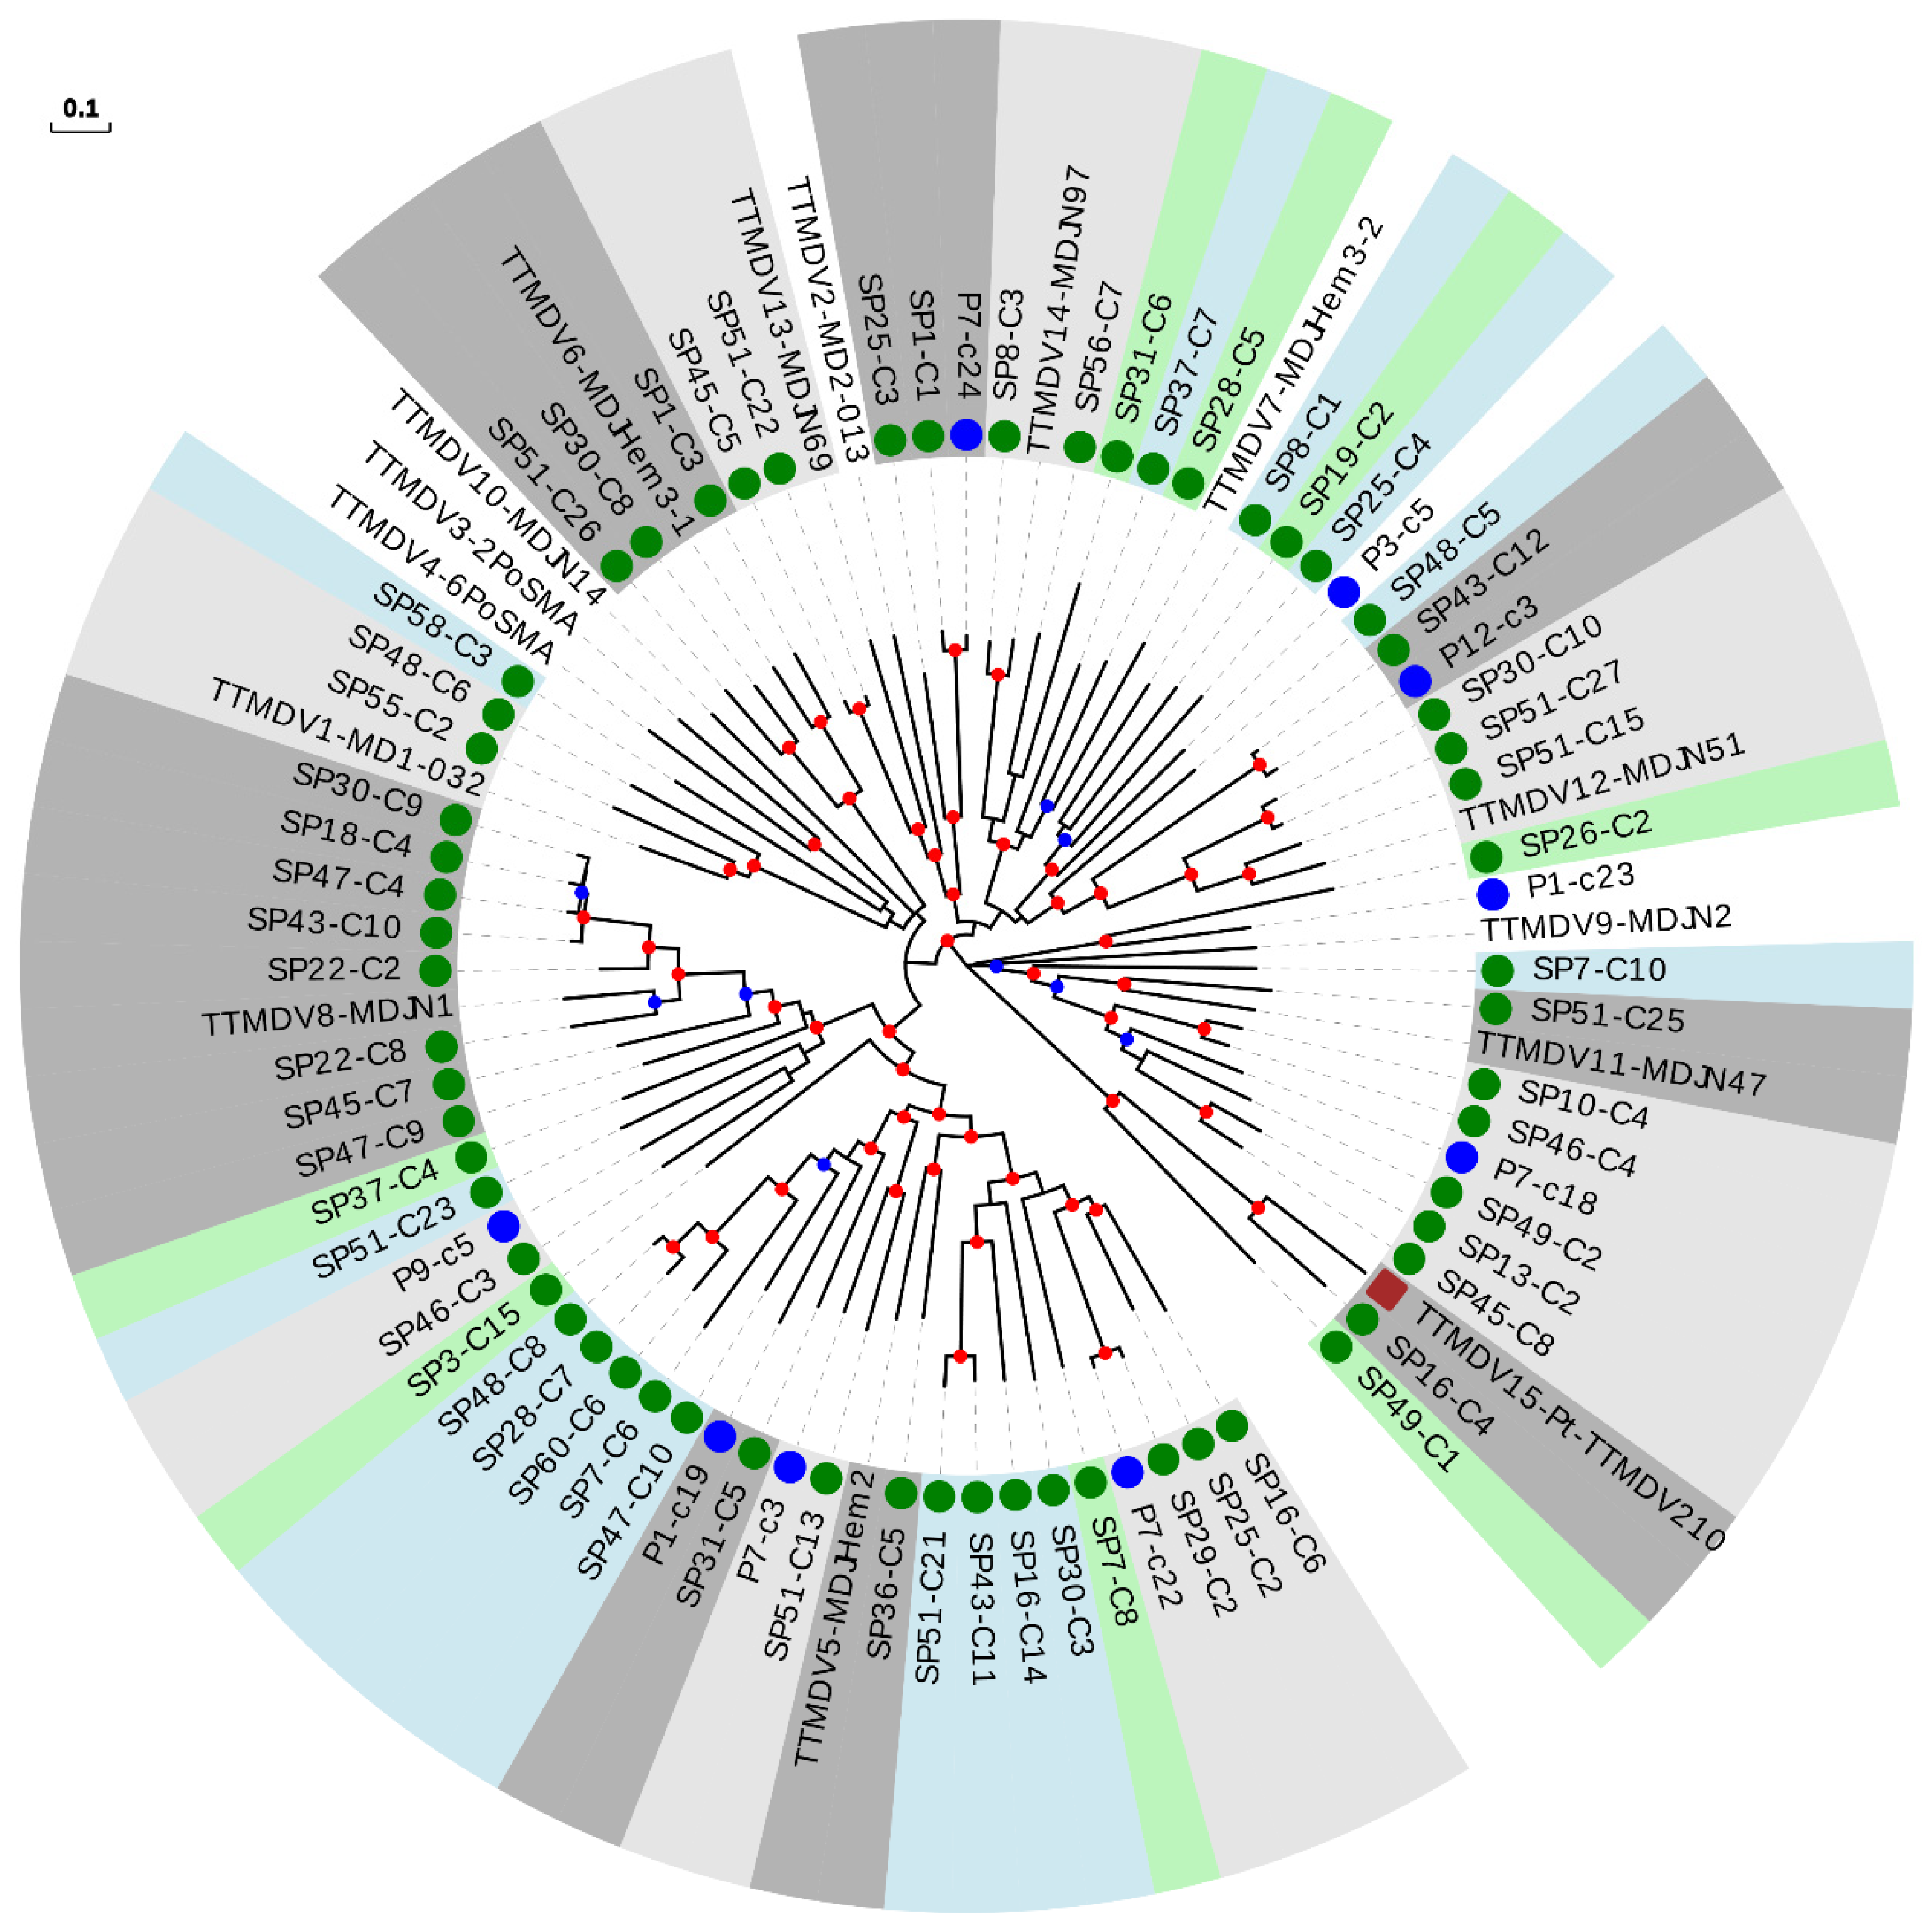 Integrative assessment of the transcriptome and virome of the